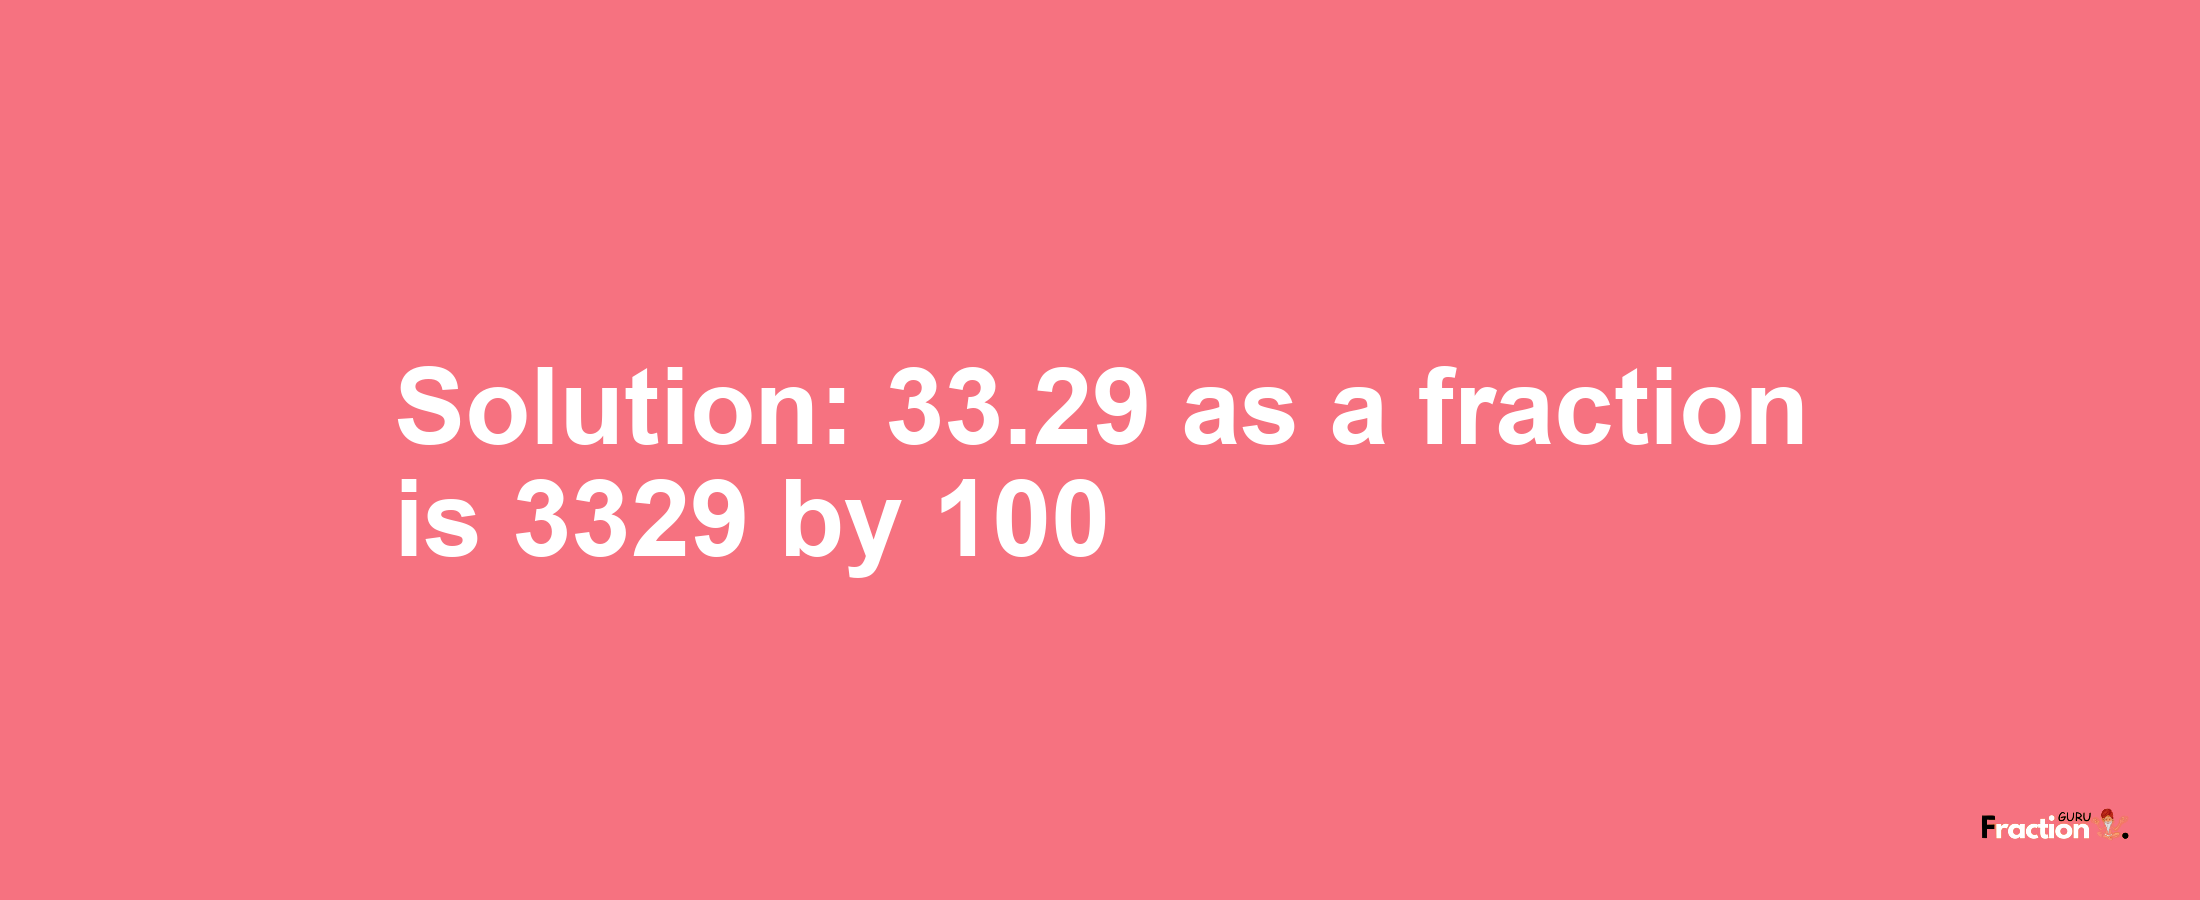 Solution:33.29 as a fraction is 3329/100